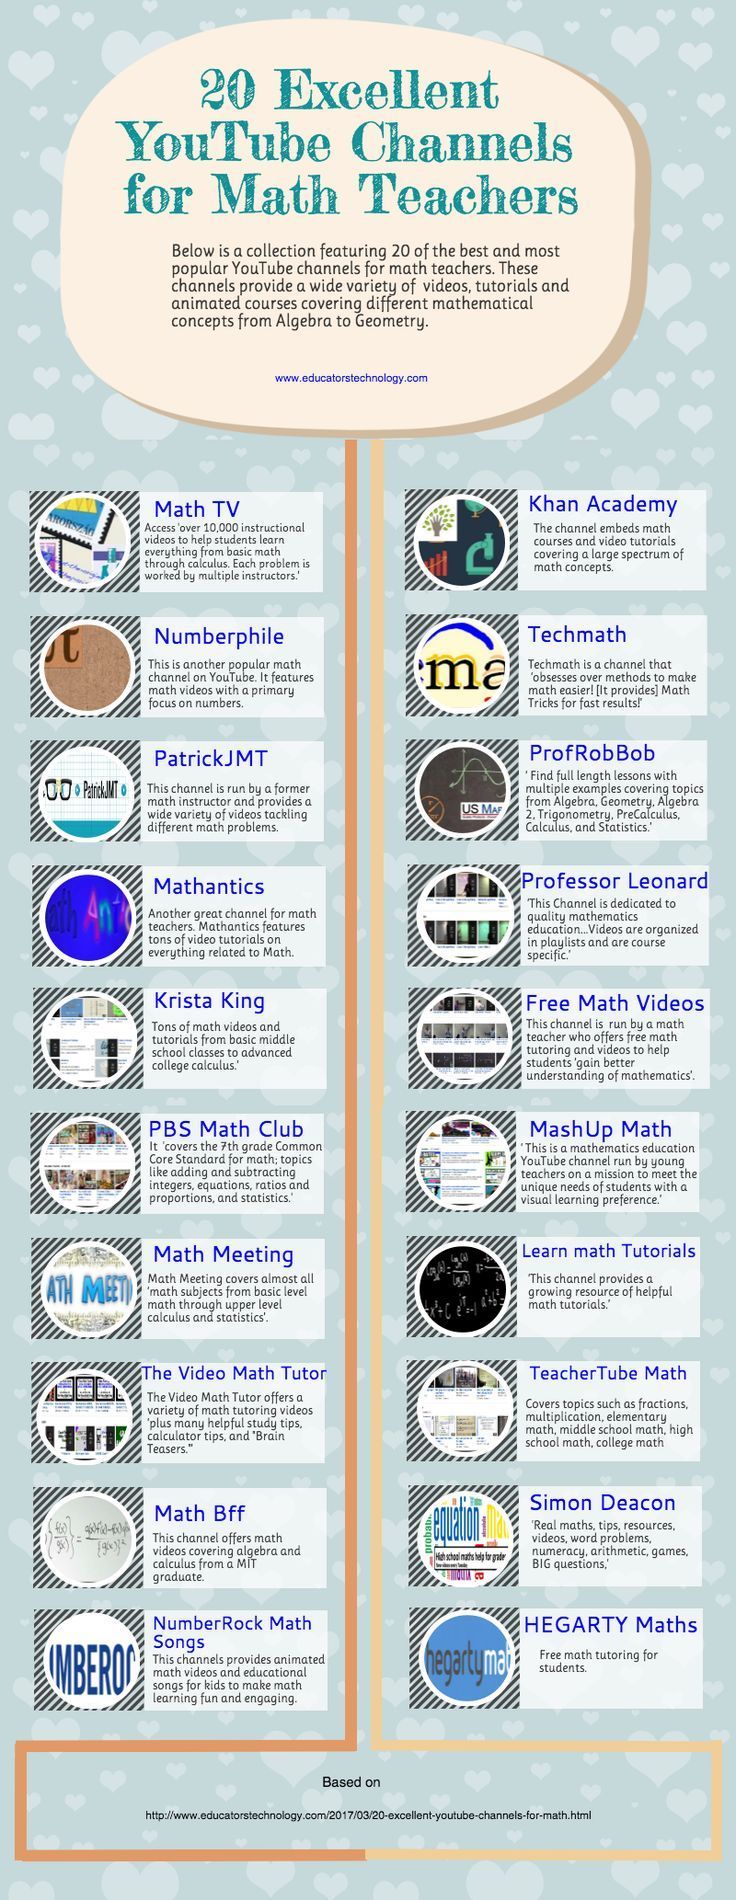 An Interesting Infographic Featuring 20 of The Best YouTube Channels for Math Teachers